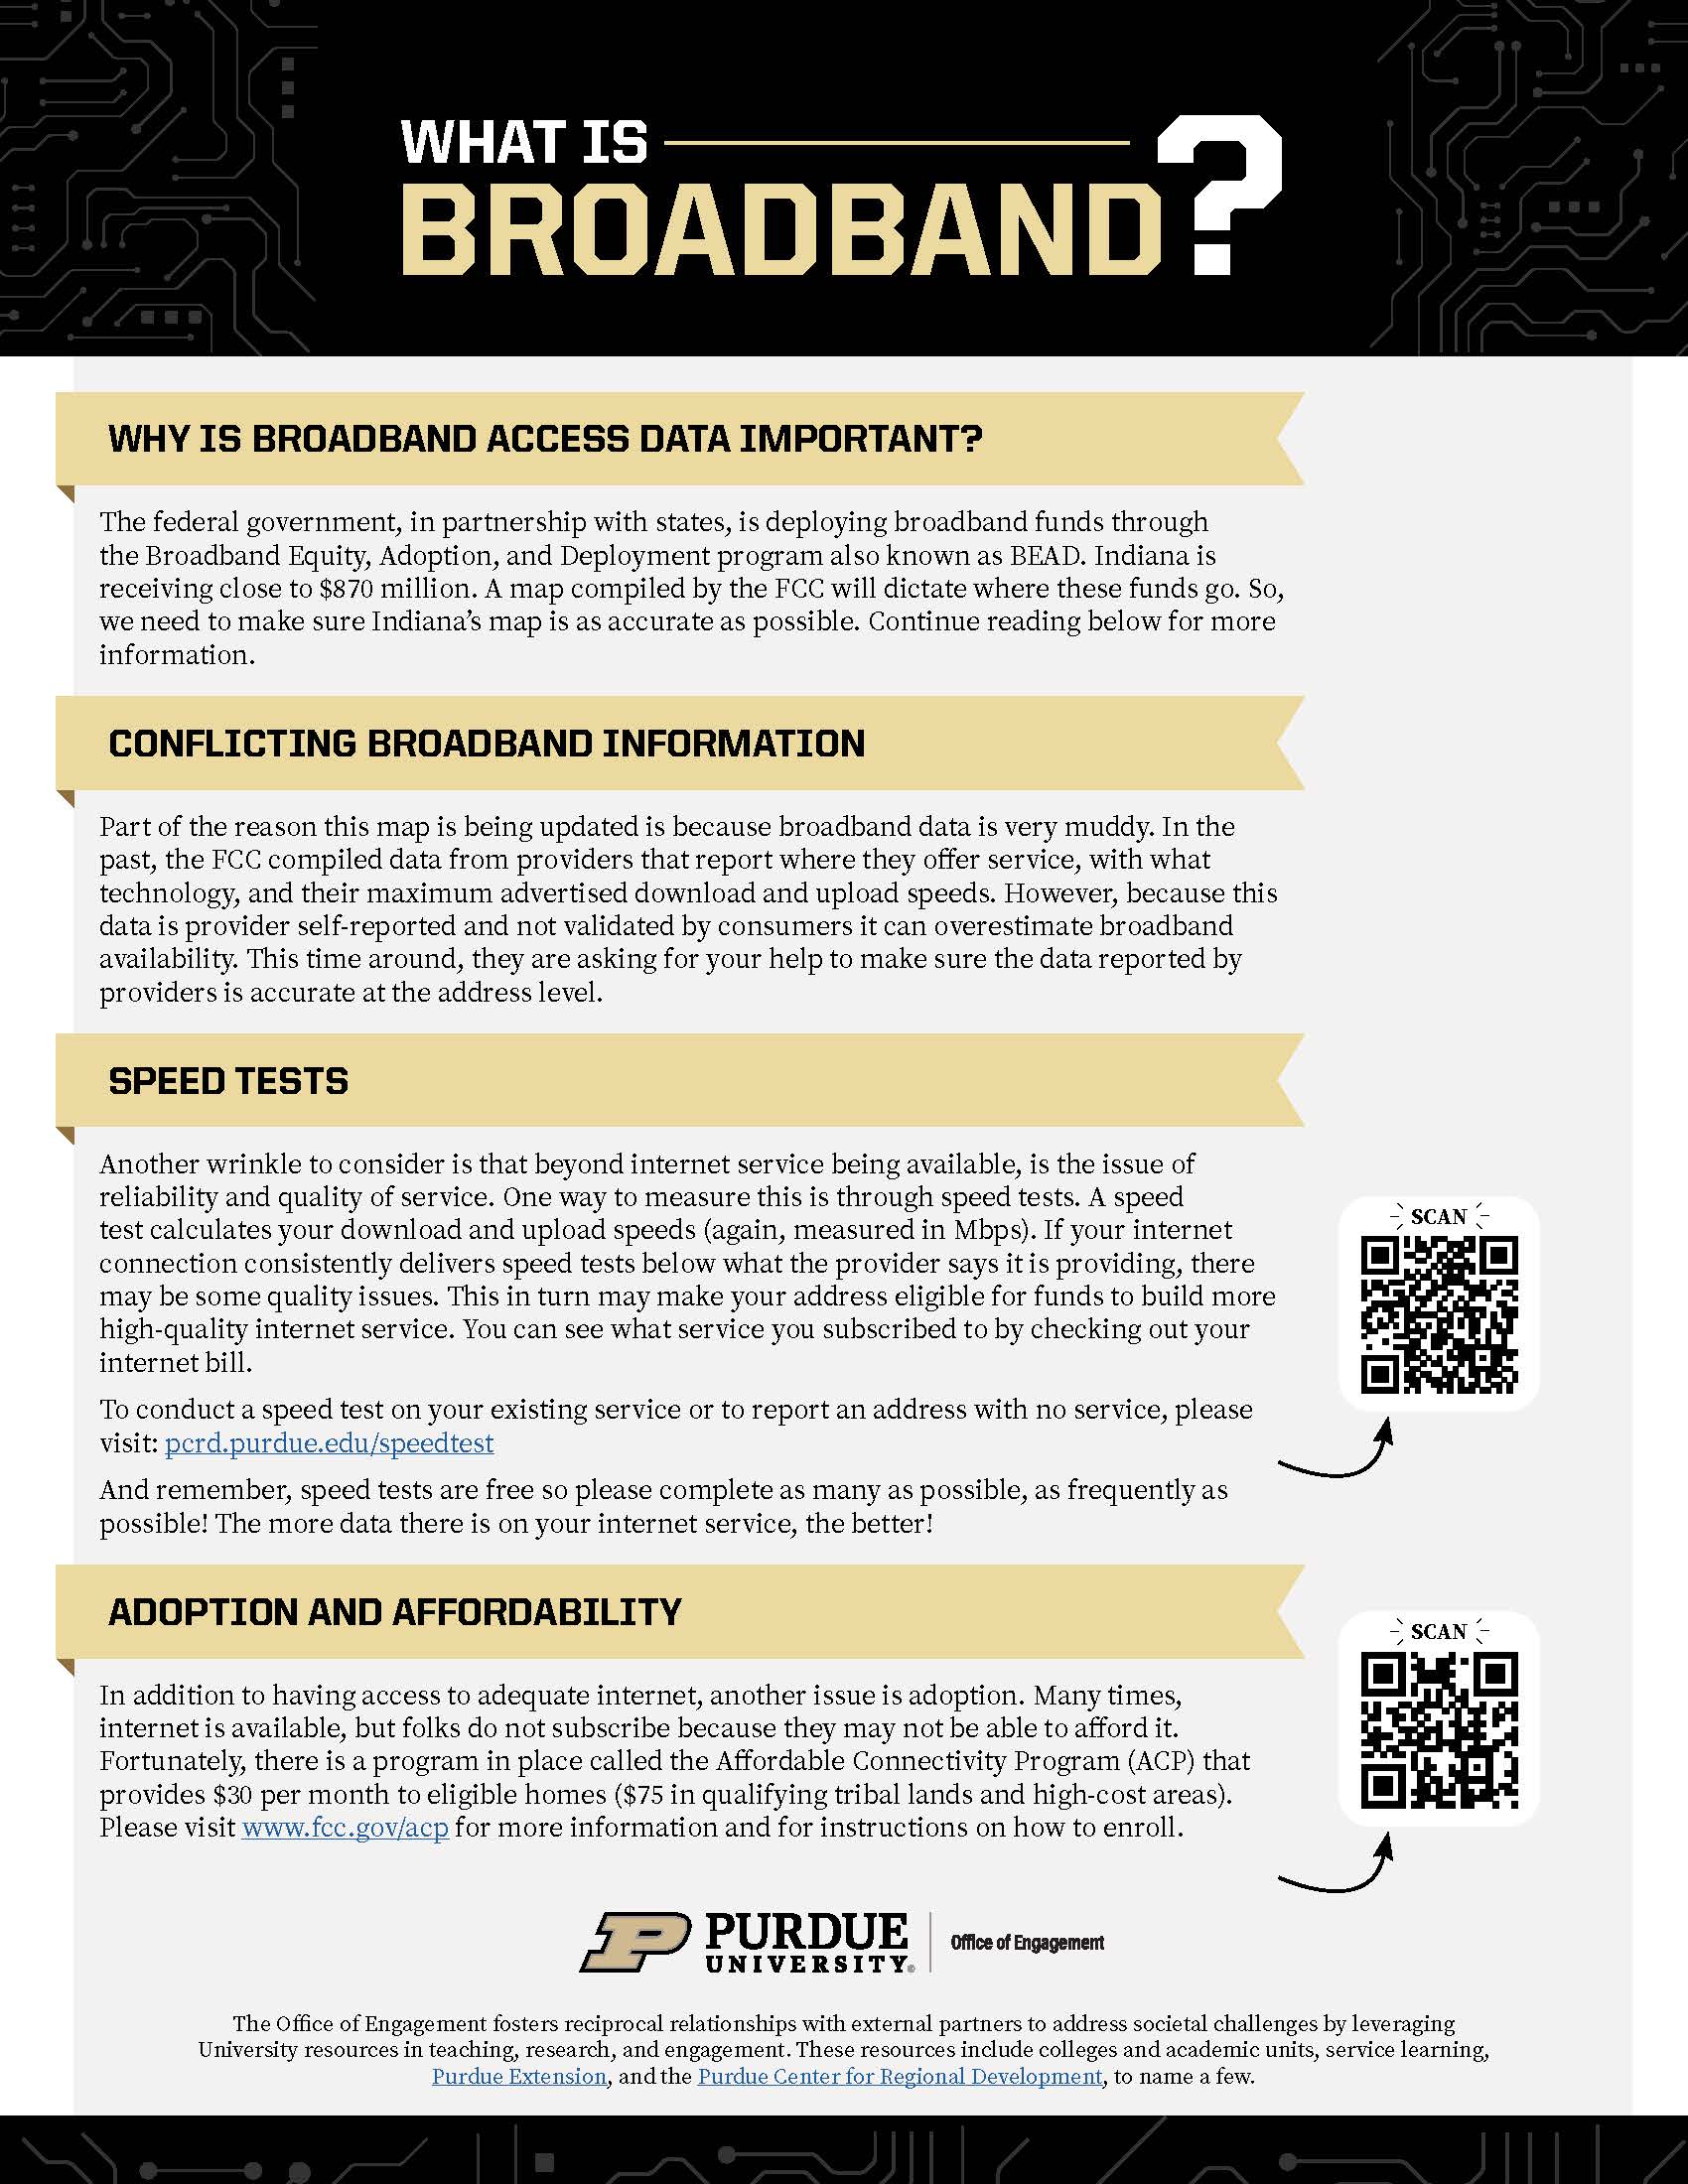 what-is-broadband_-a-quick-overview_page_2.jpg